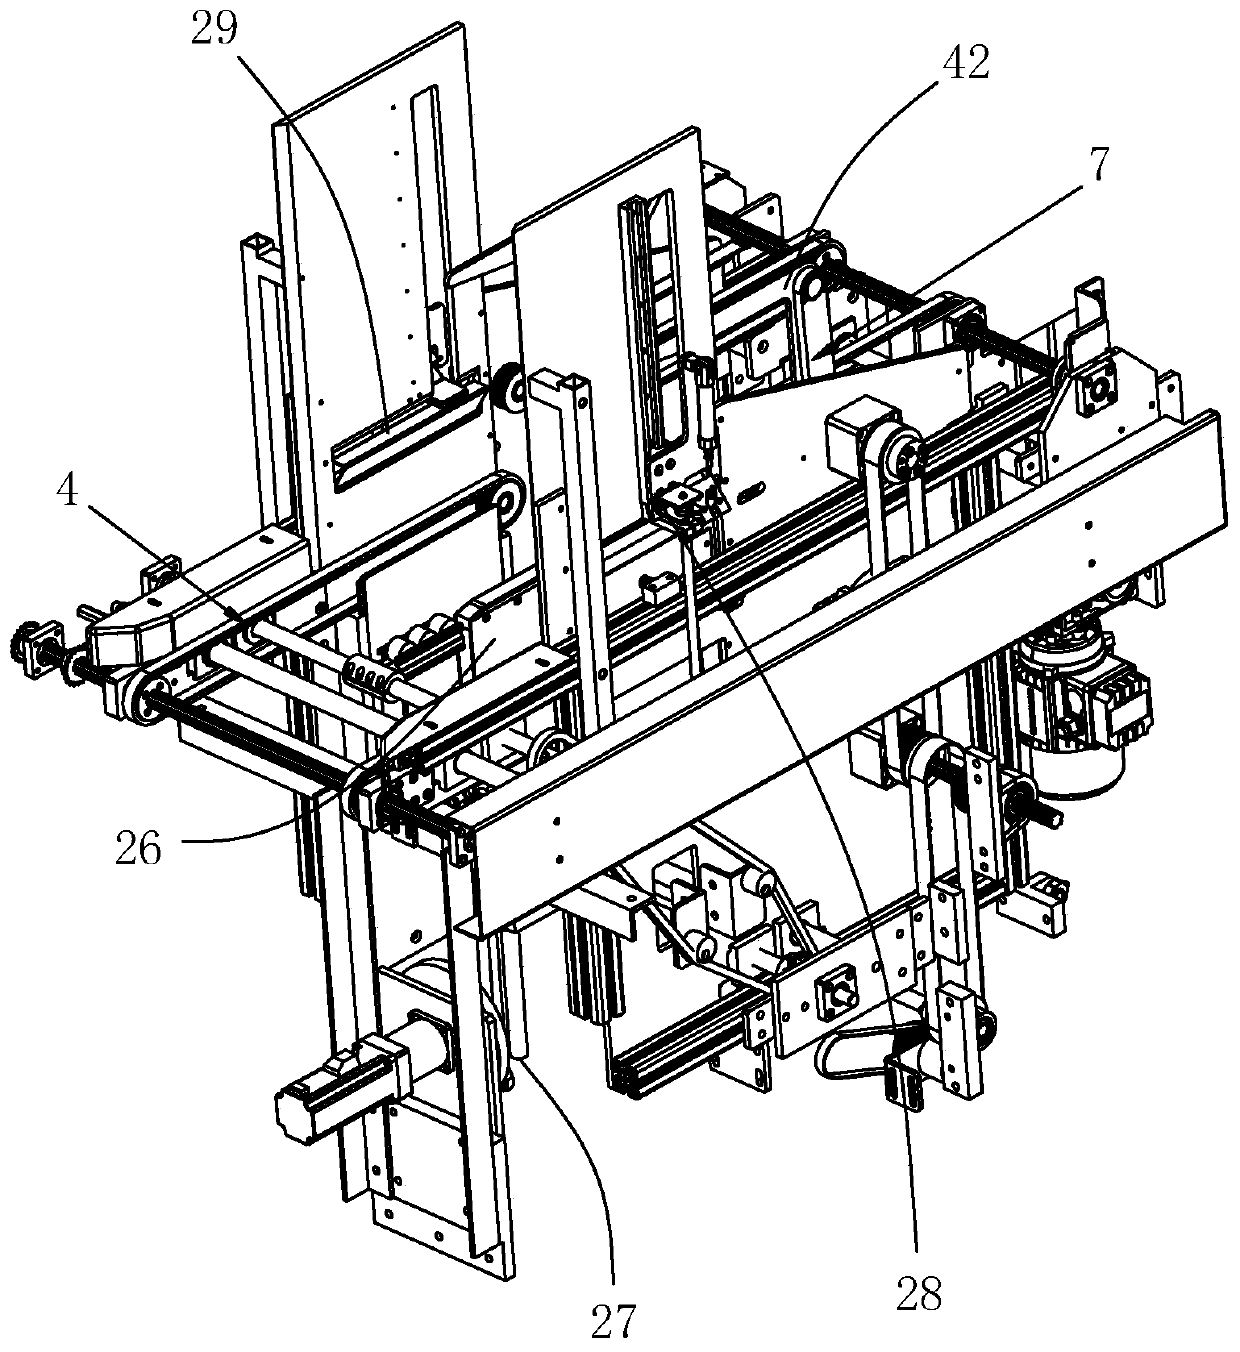 Book stacking equipment